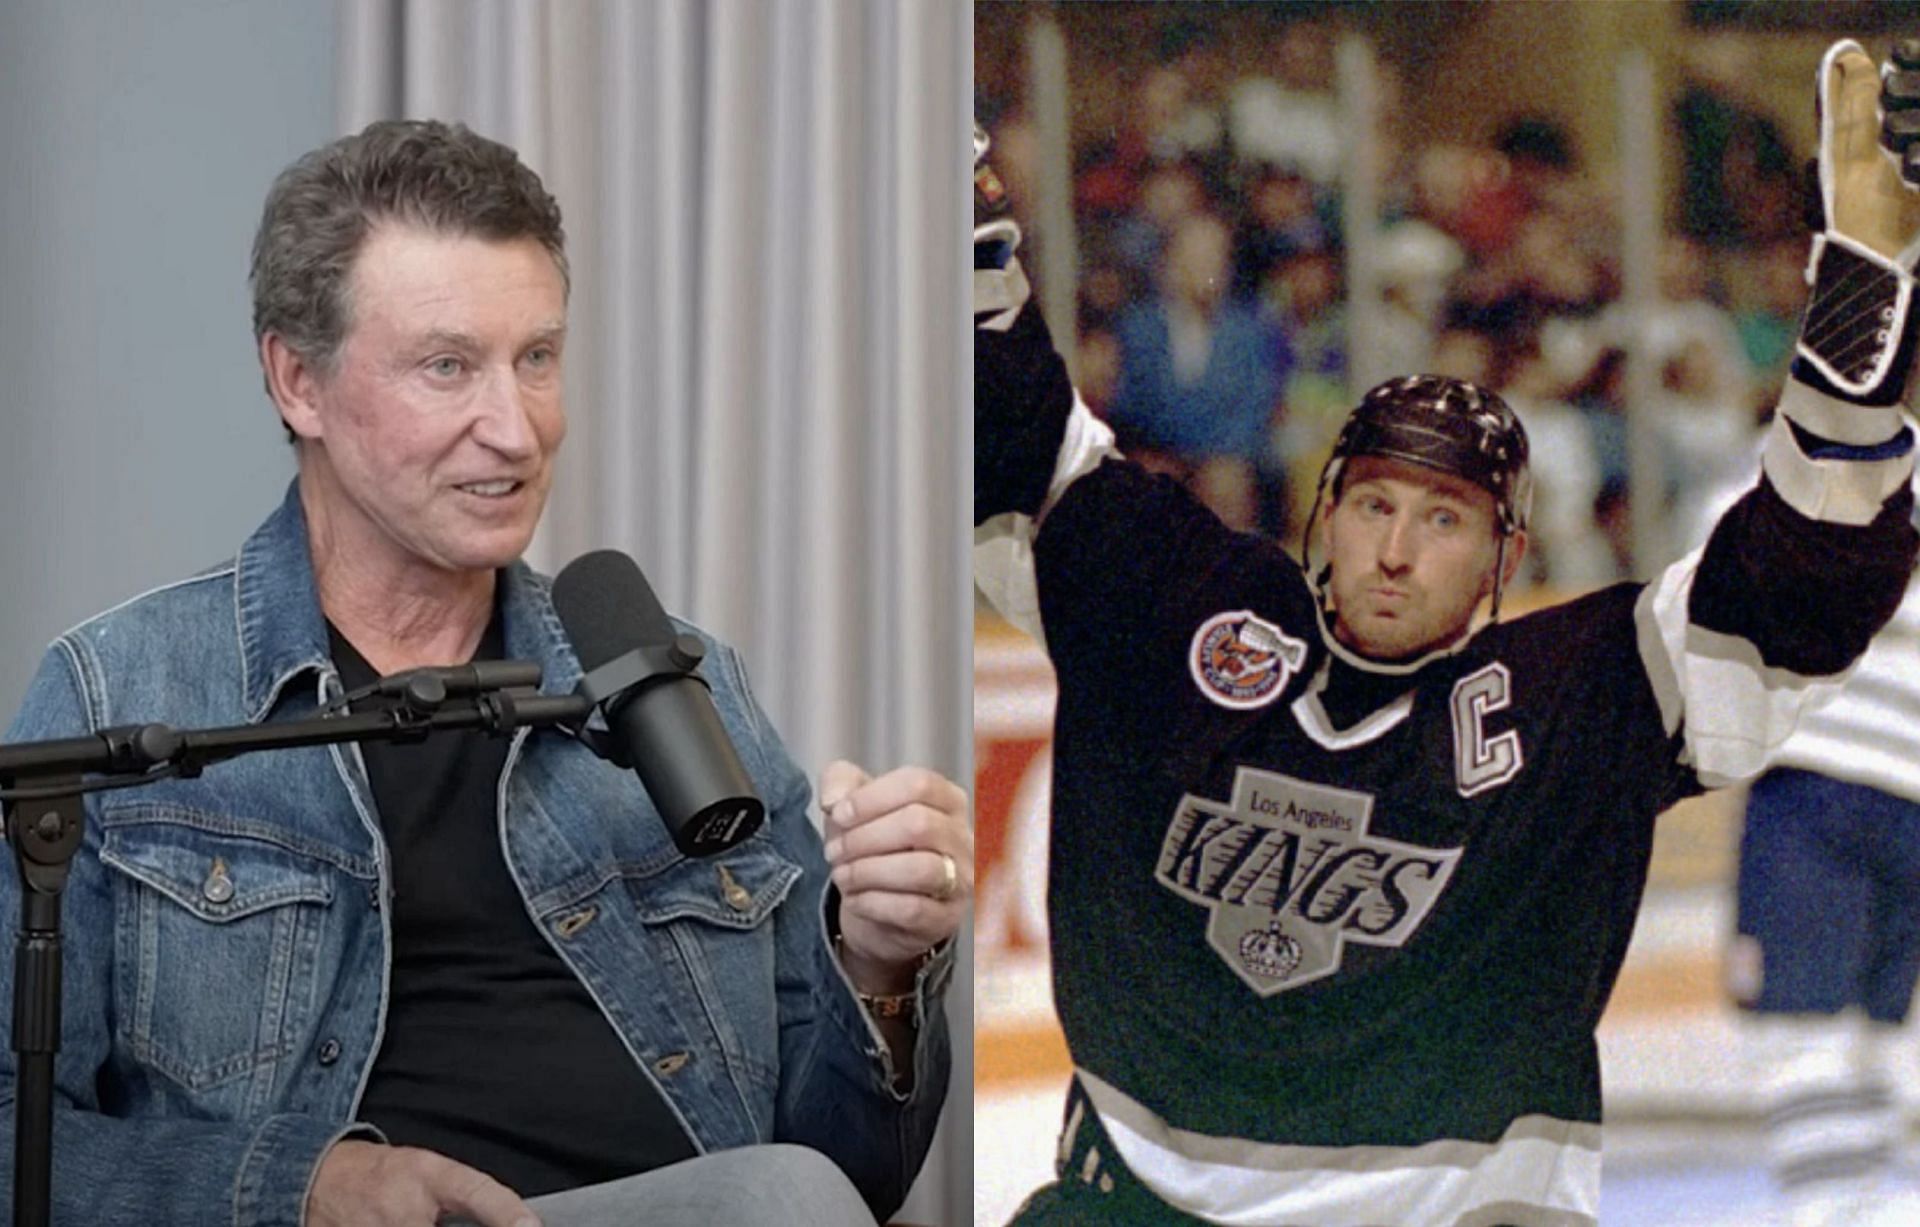 Wayne Gretzky shares crazy anecdote involving security guard before his legendary 5-point Game 7 performance against Maple Leafs in 